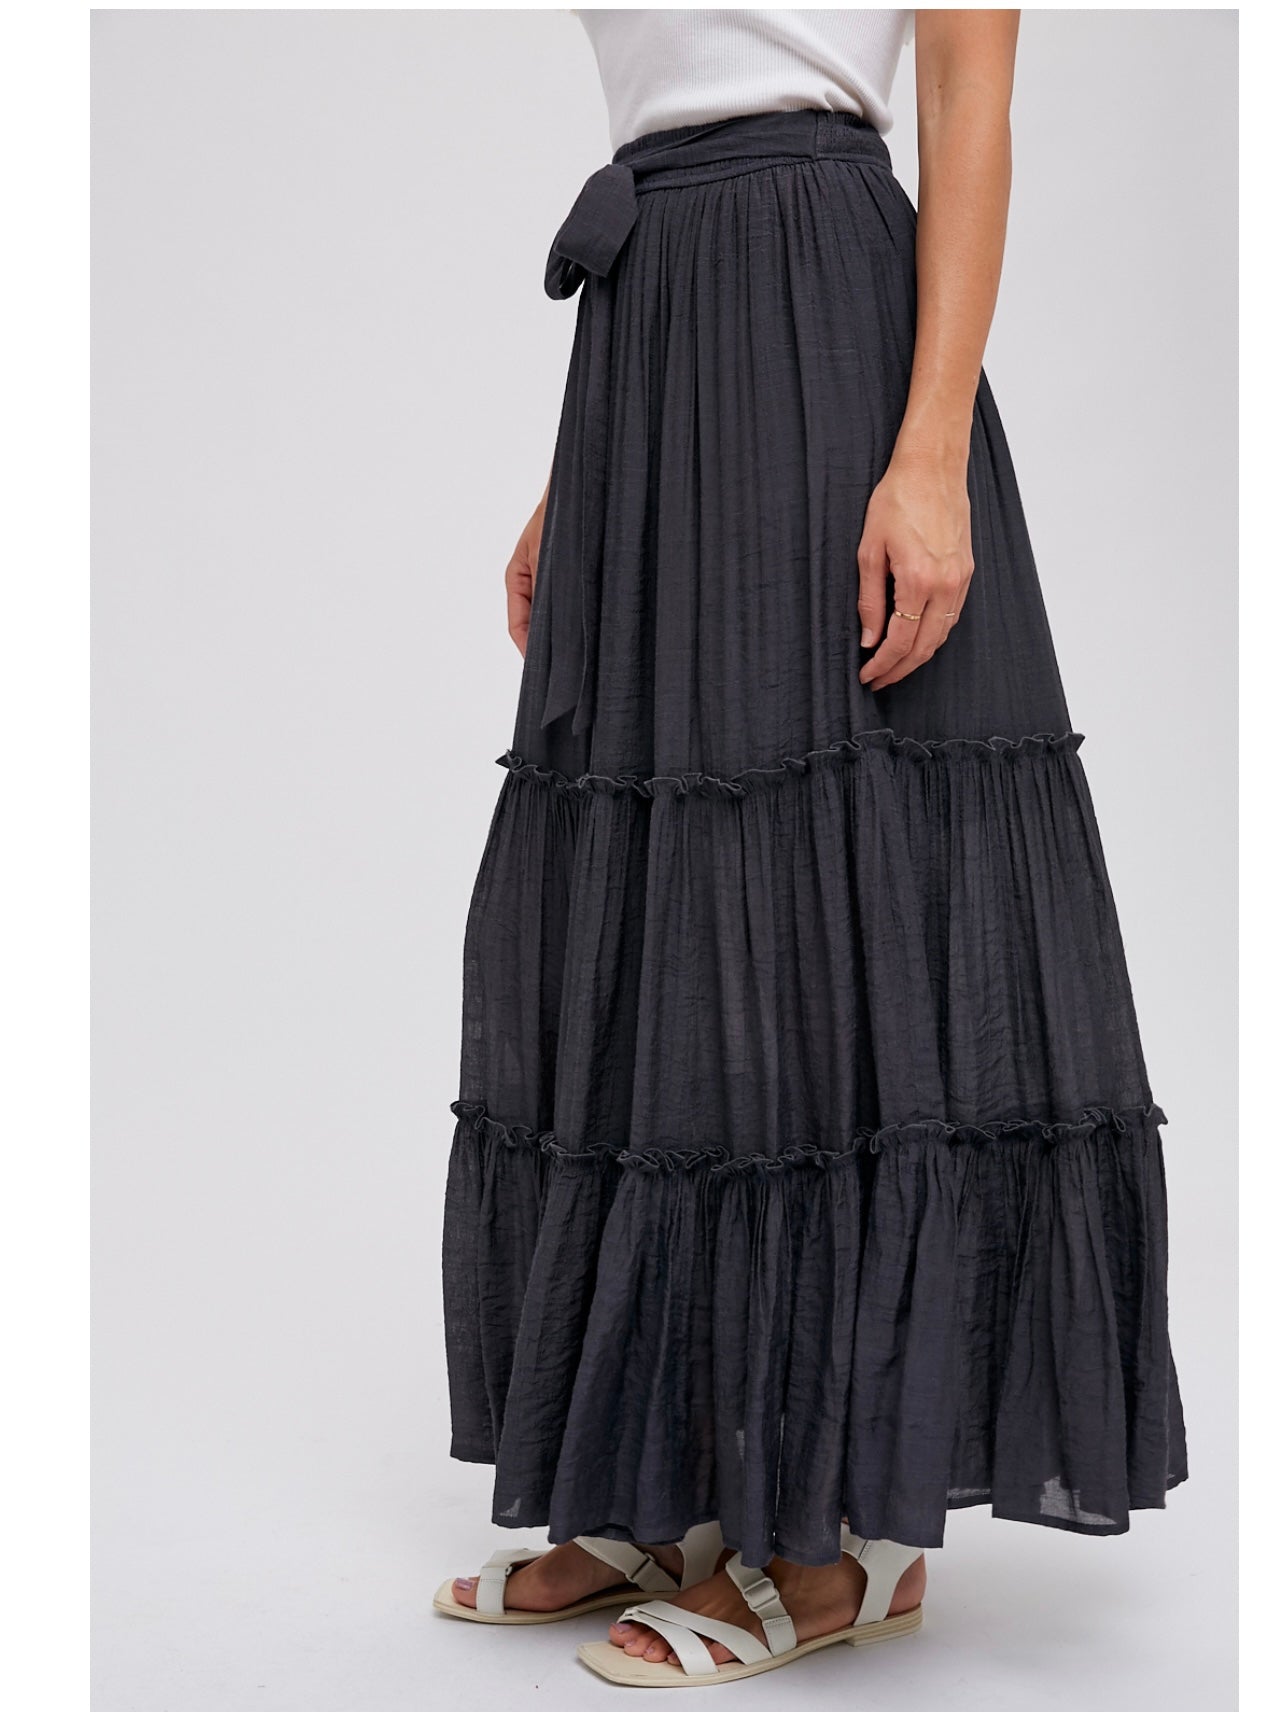 Tiered Ruffle Flow Maxi Skirt in Ash Grey